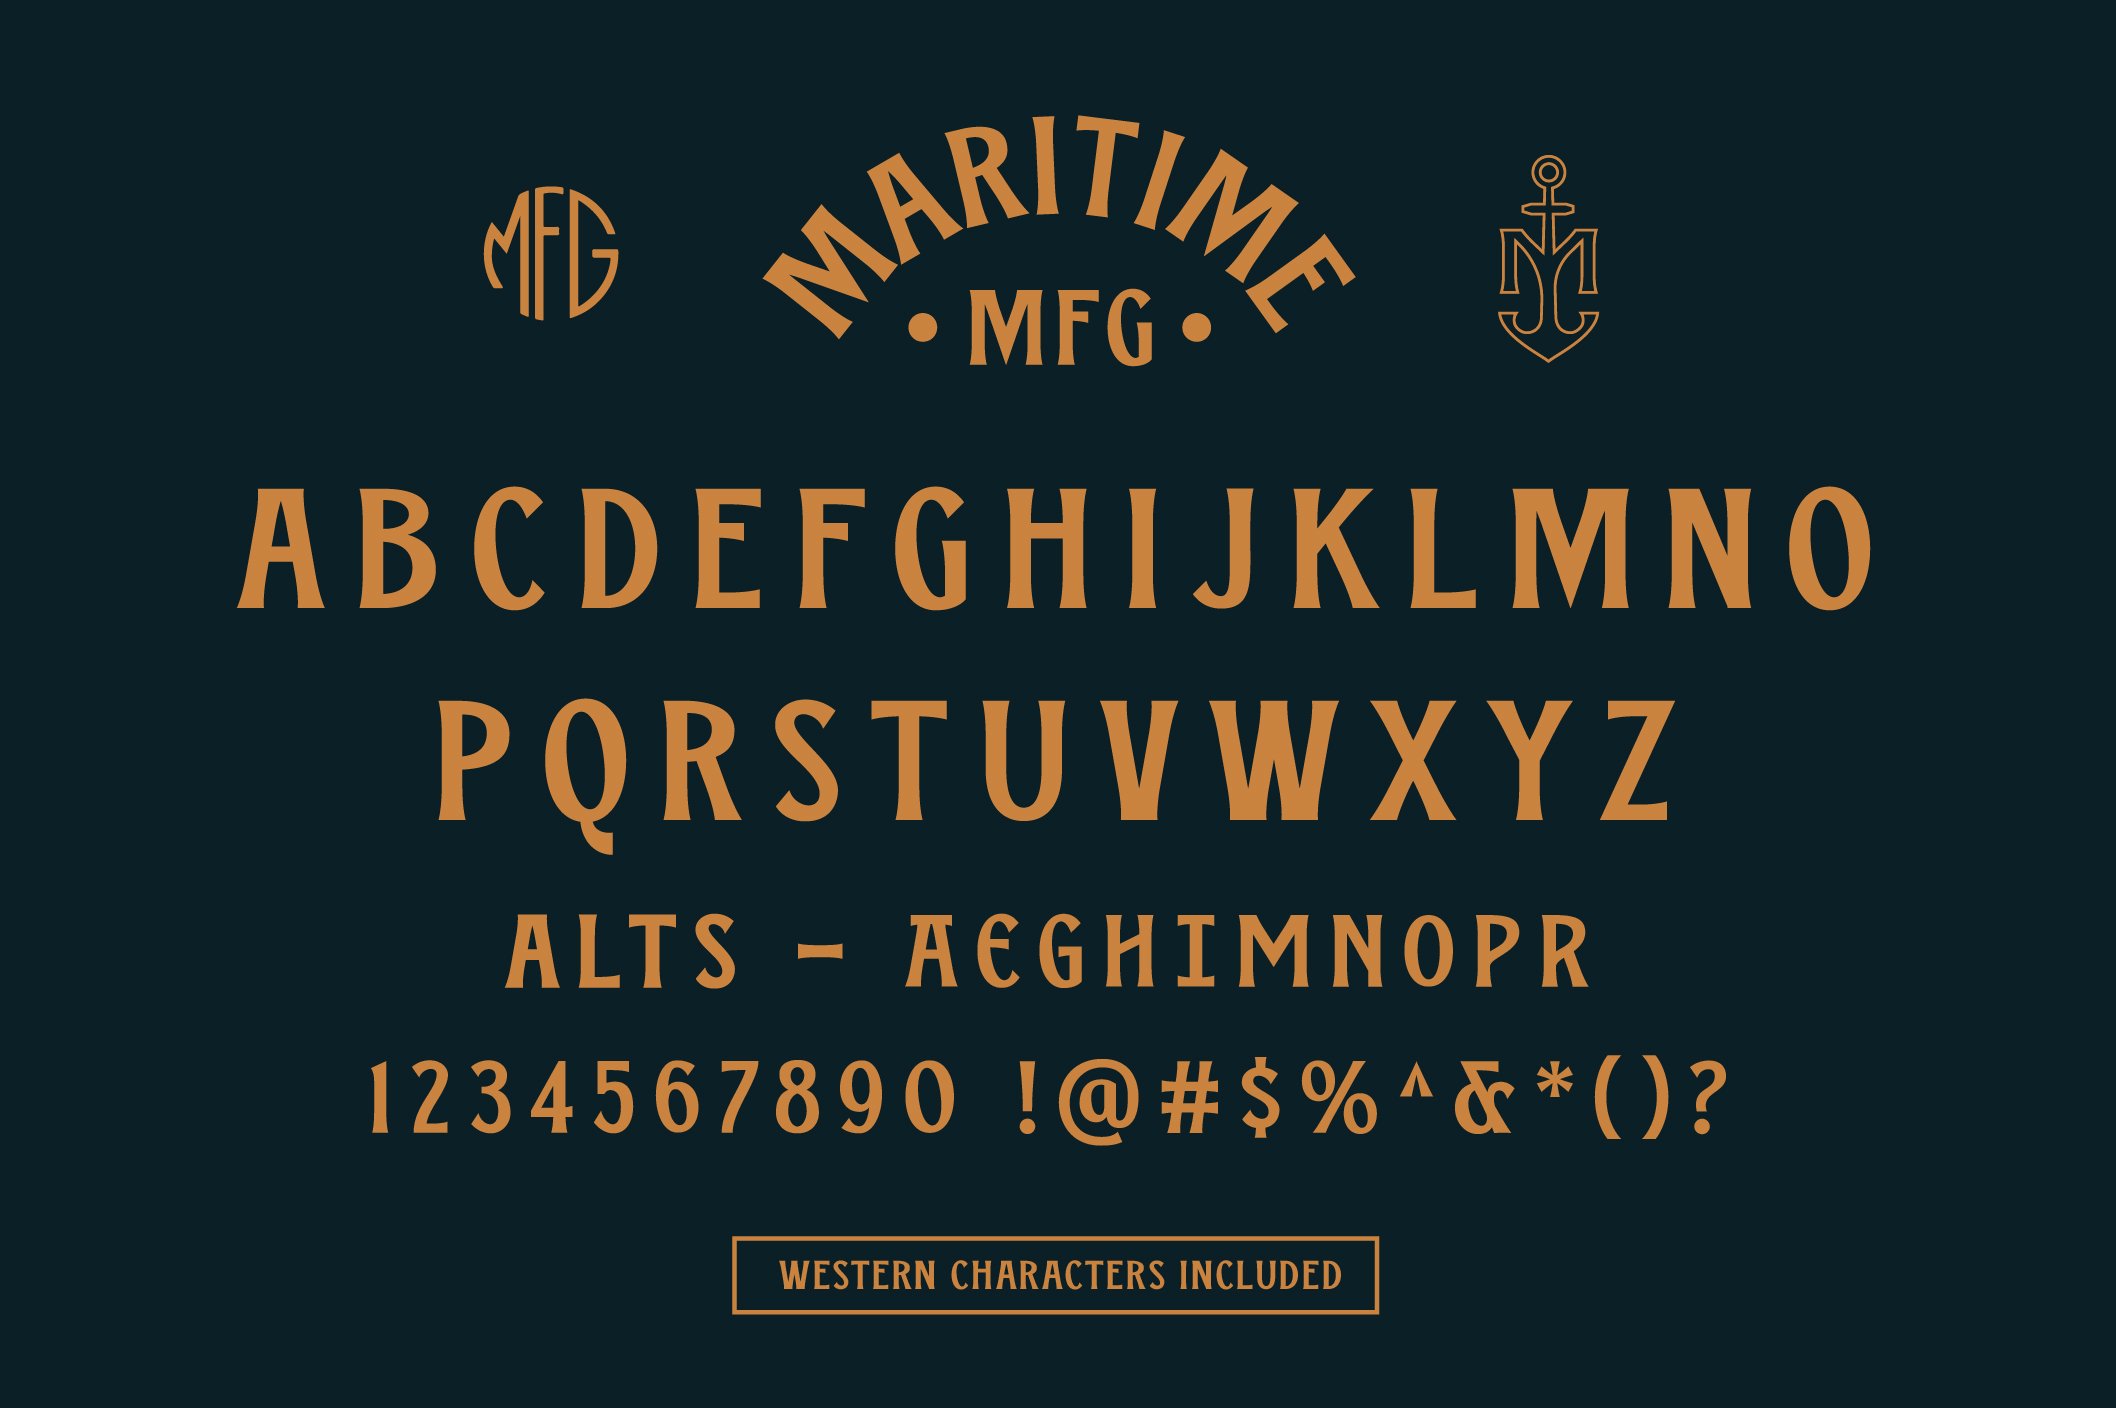 Maritime MFG - A Spur Serif Typeface preview image.